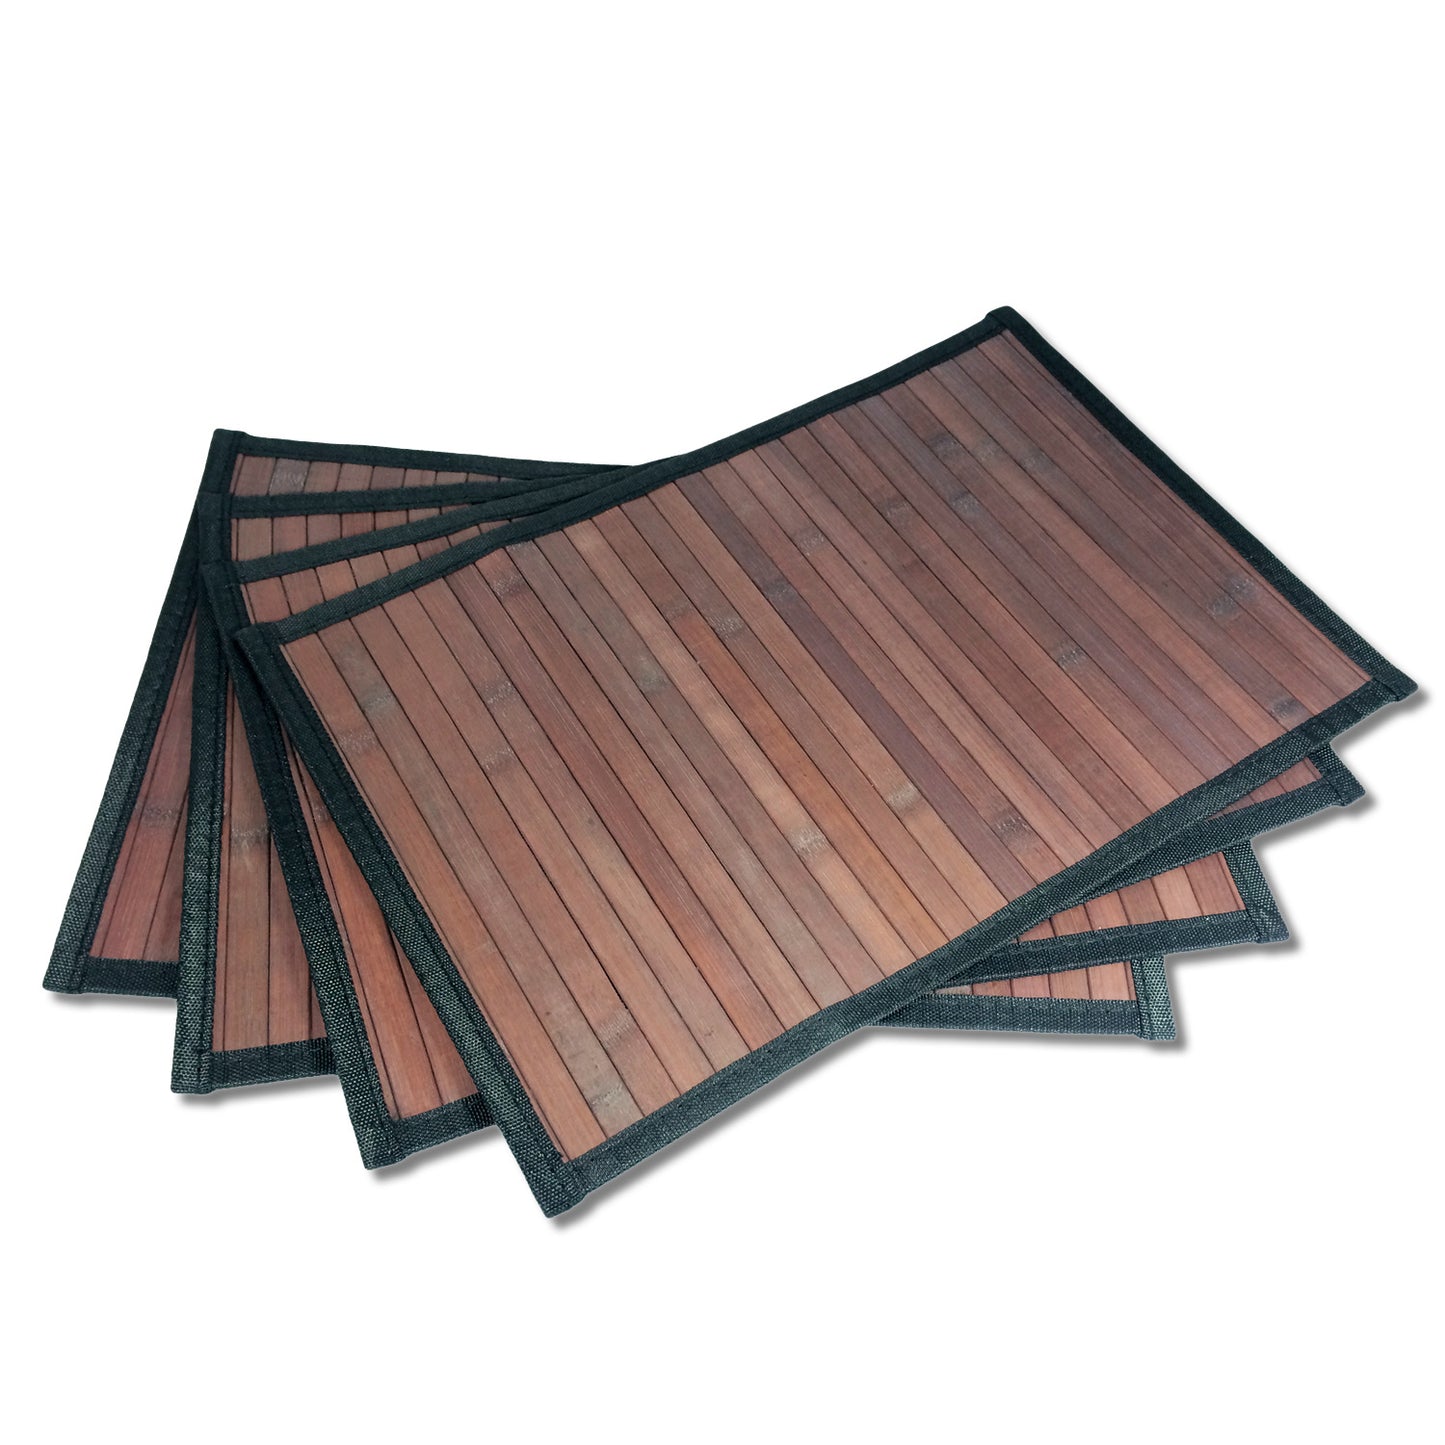 Bamboo Placemat - Dark Brown - Black Border, 4pc Set by Sustainable Simplicity